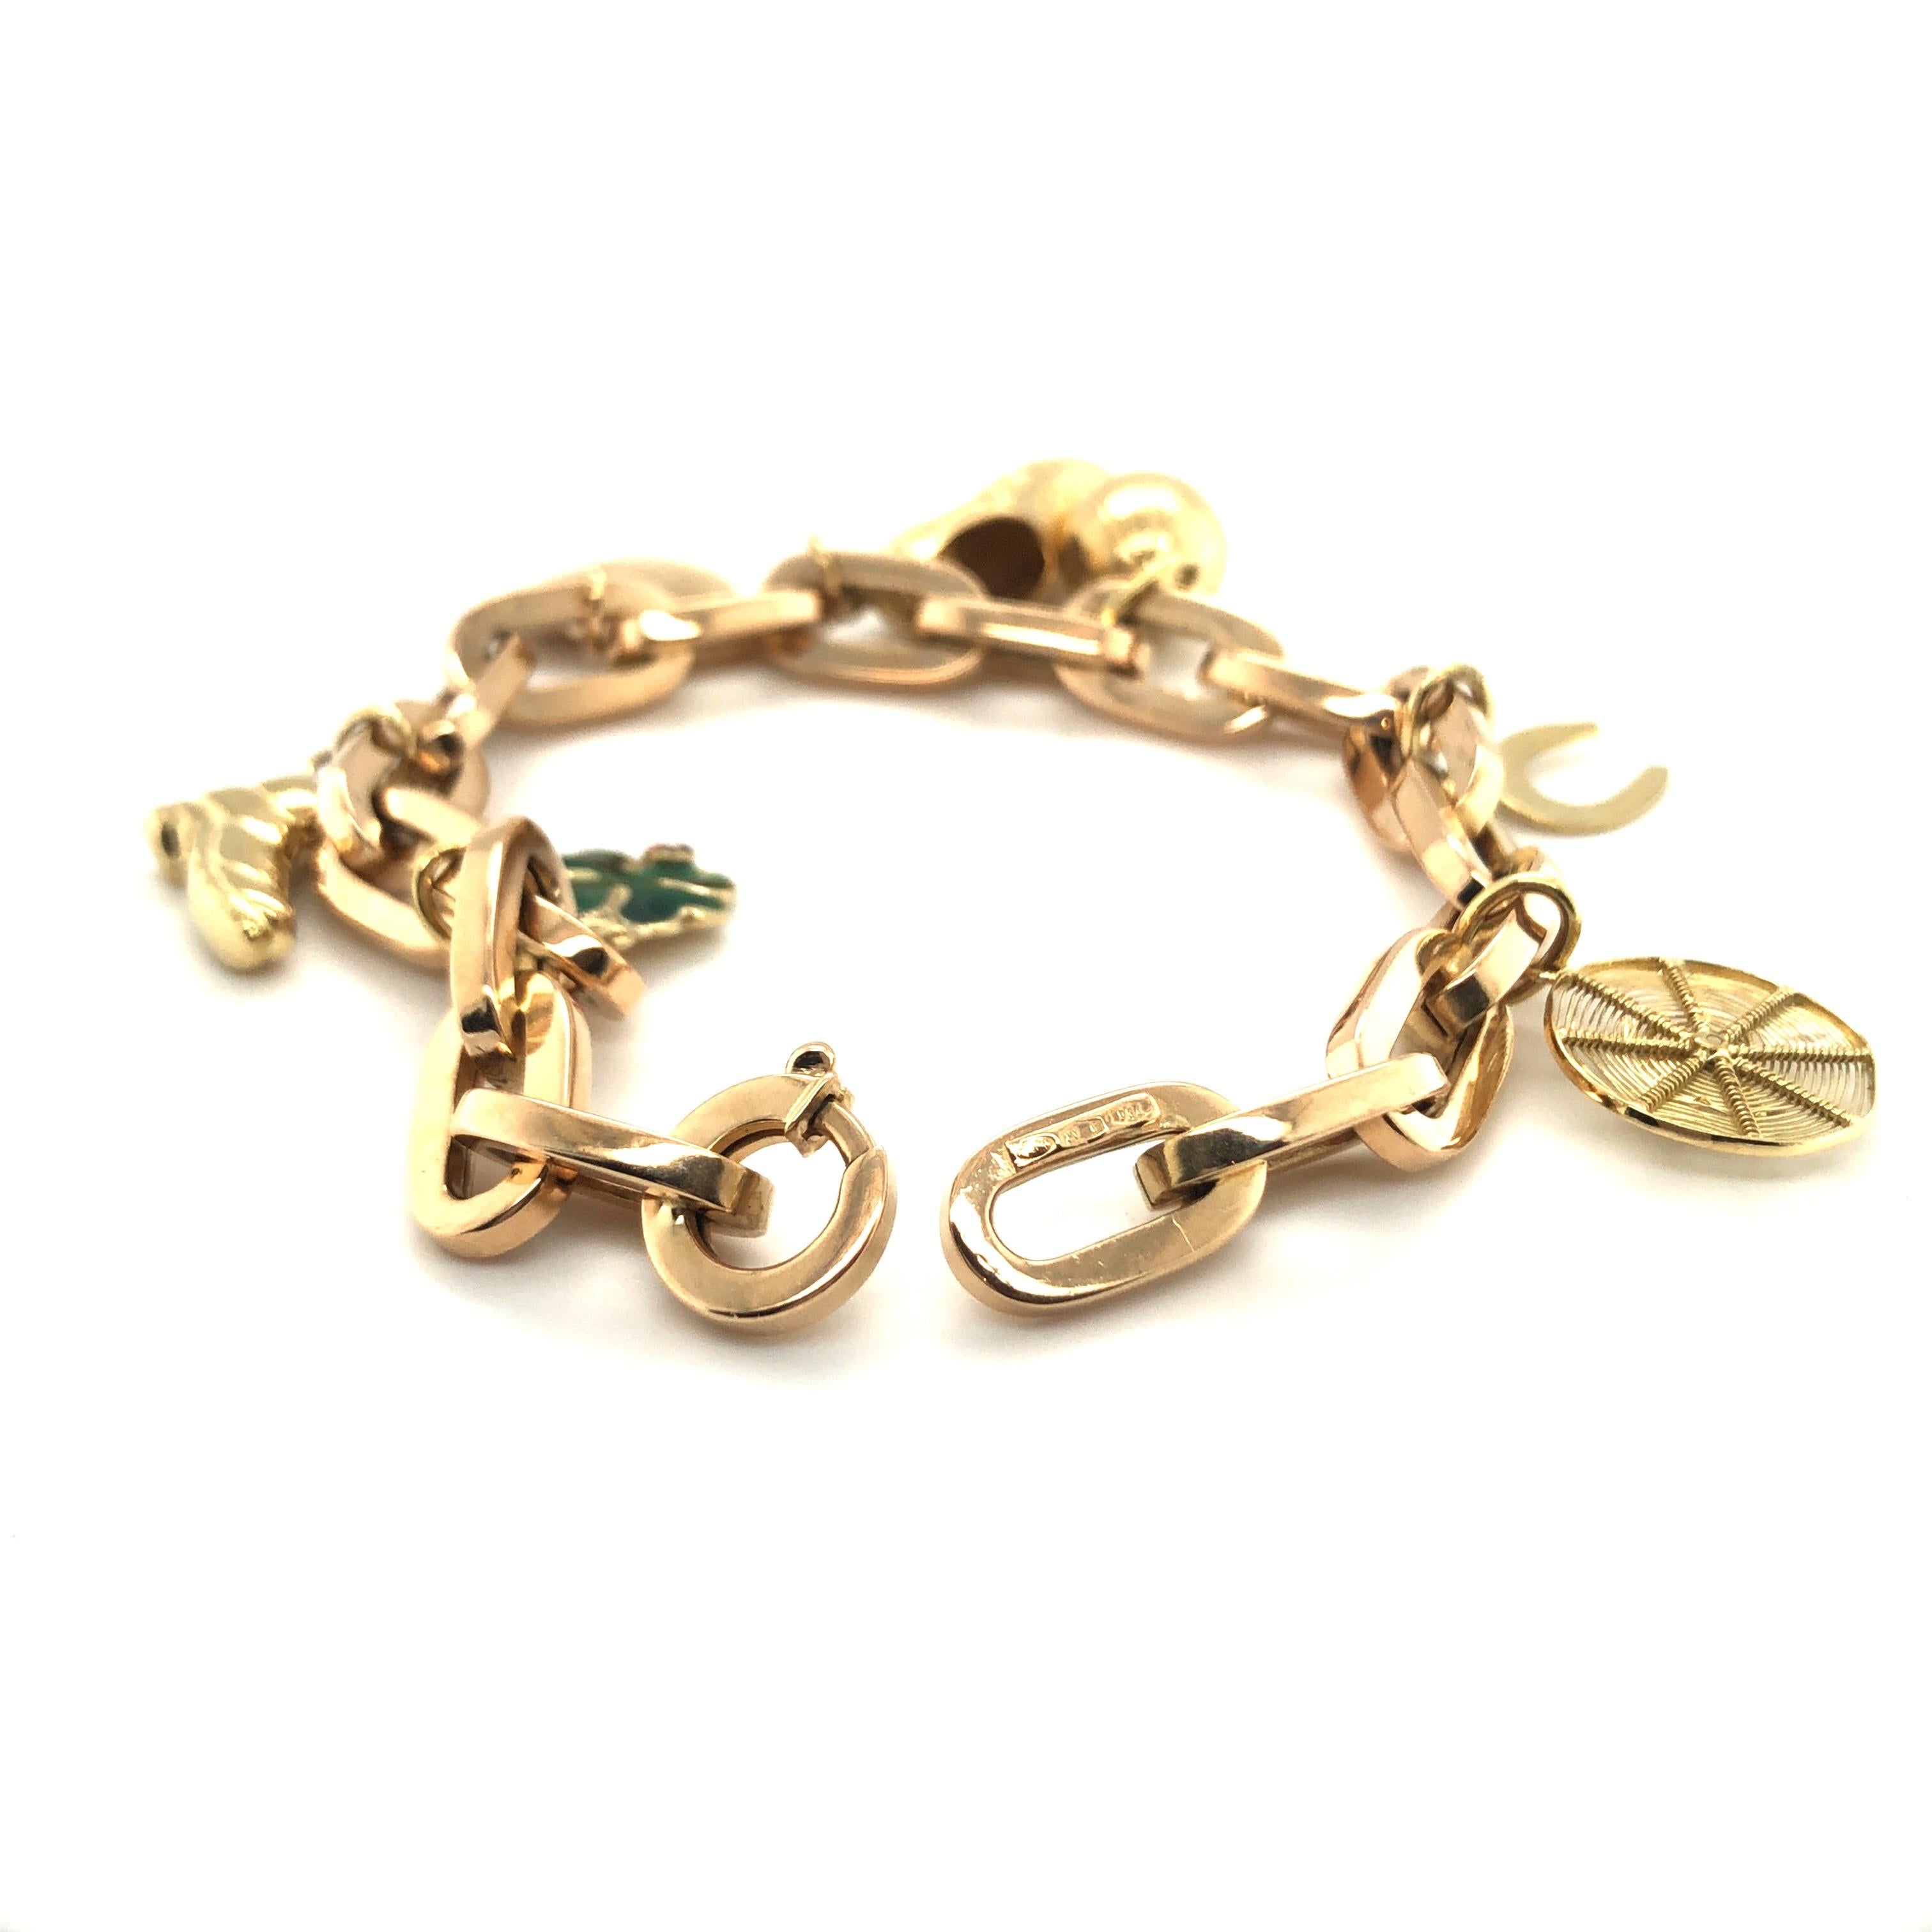 Lovely 18 karat yellow gold charm bracelet.
Anchor chain crafted in 18 karat yellow gold and adorned with 7 charms depicting a green enameled four-leaf clover, a climbing boot, an heart, a dutch clog, a ball, an horseshoe and a spider sitting on its